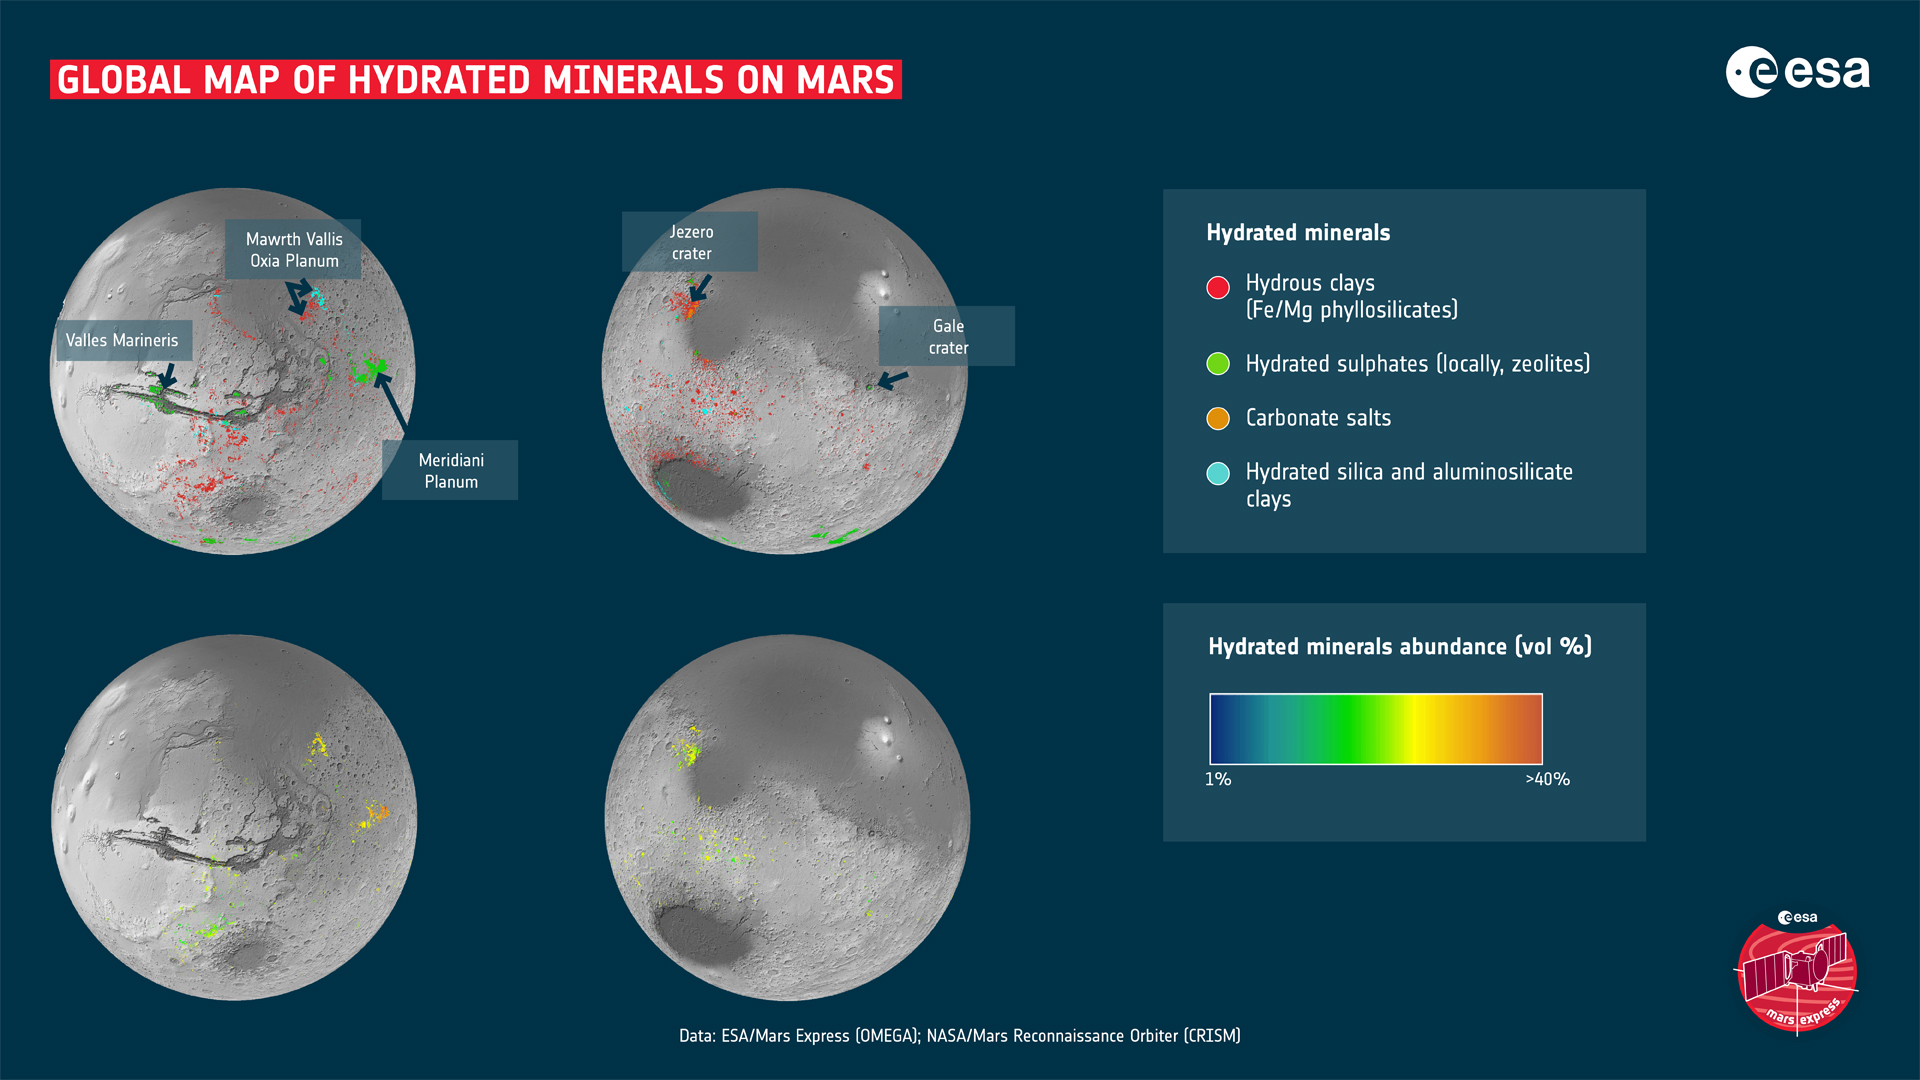 Data from two Mars missions have been used to create the first detailed global map of hydrated mineral deposits on Mars.